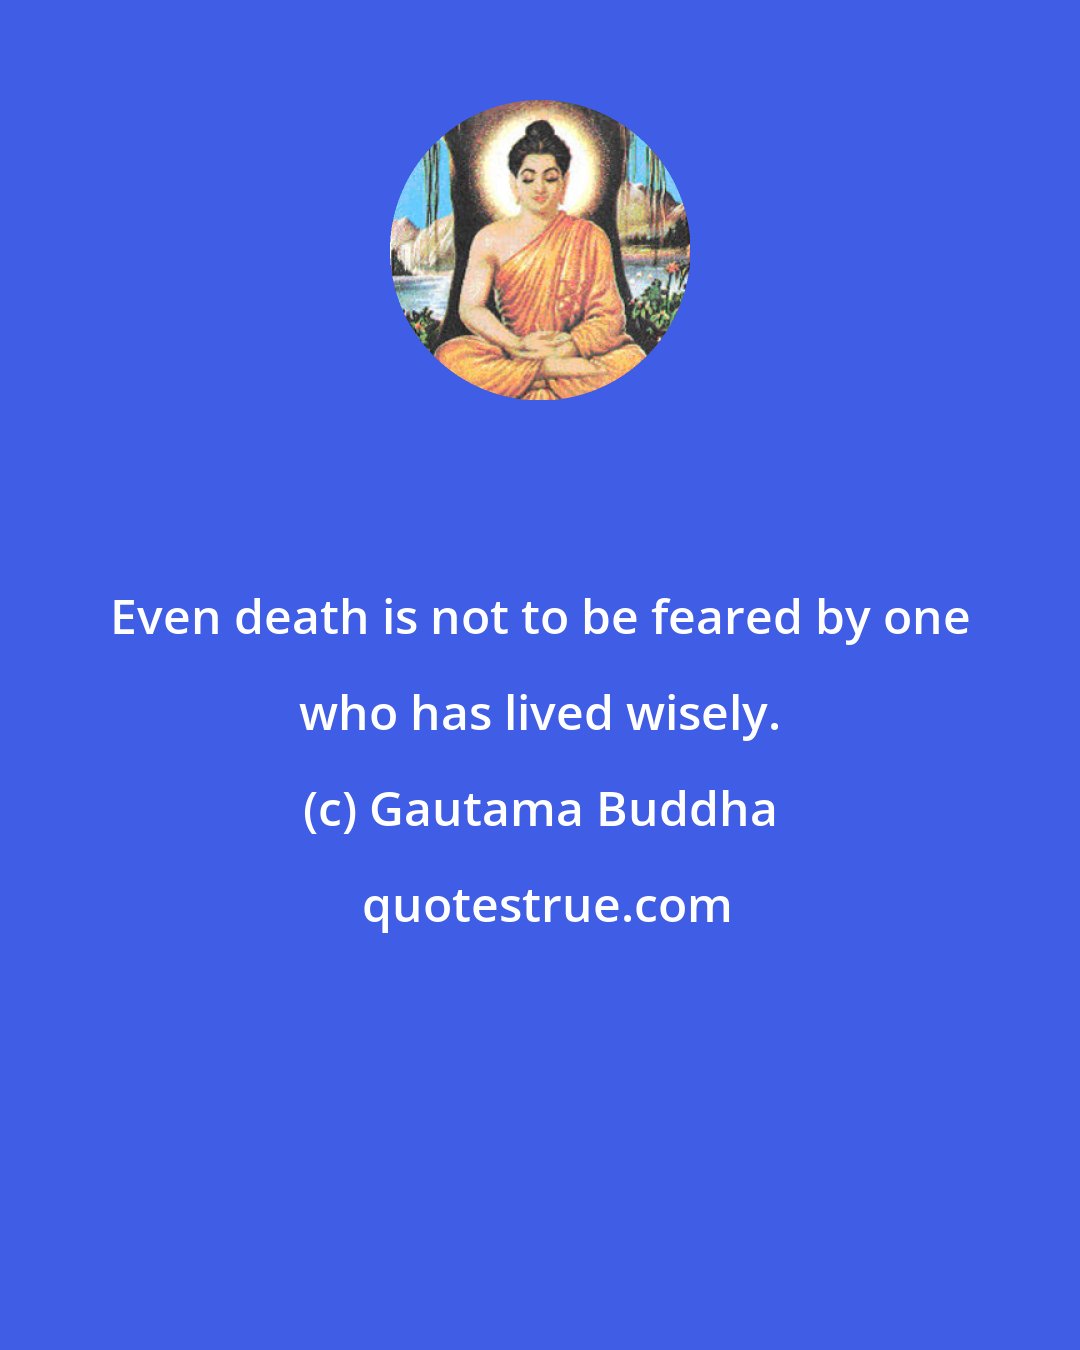 Gautama Buddha: Even death is not to be feared by one who has lived wisely.